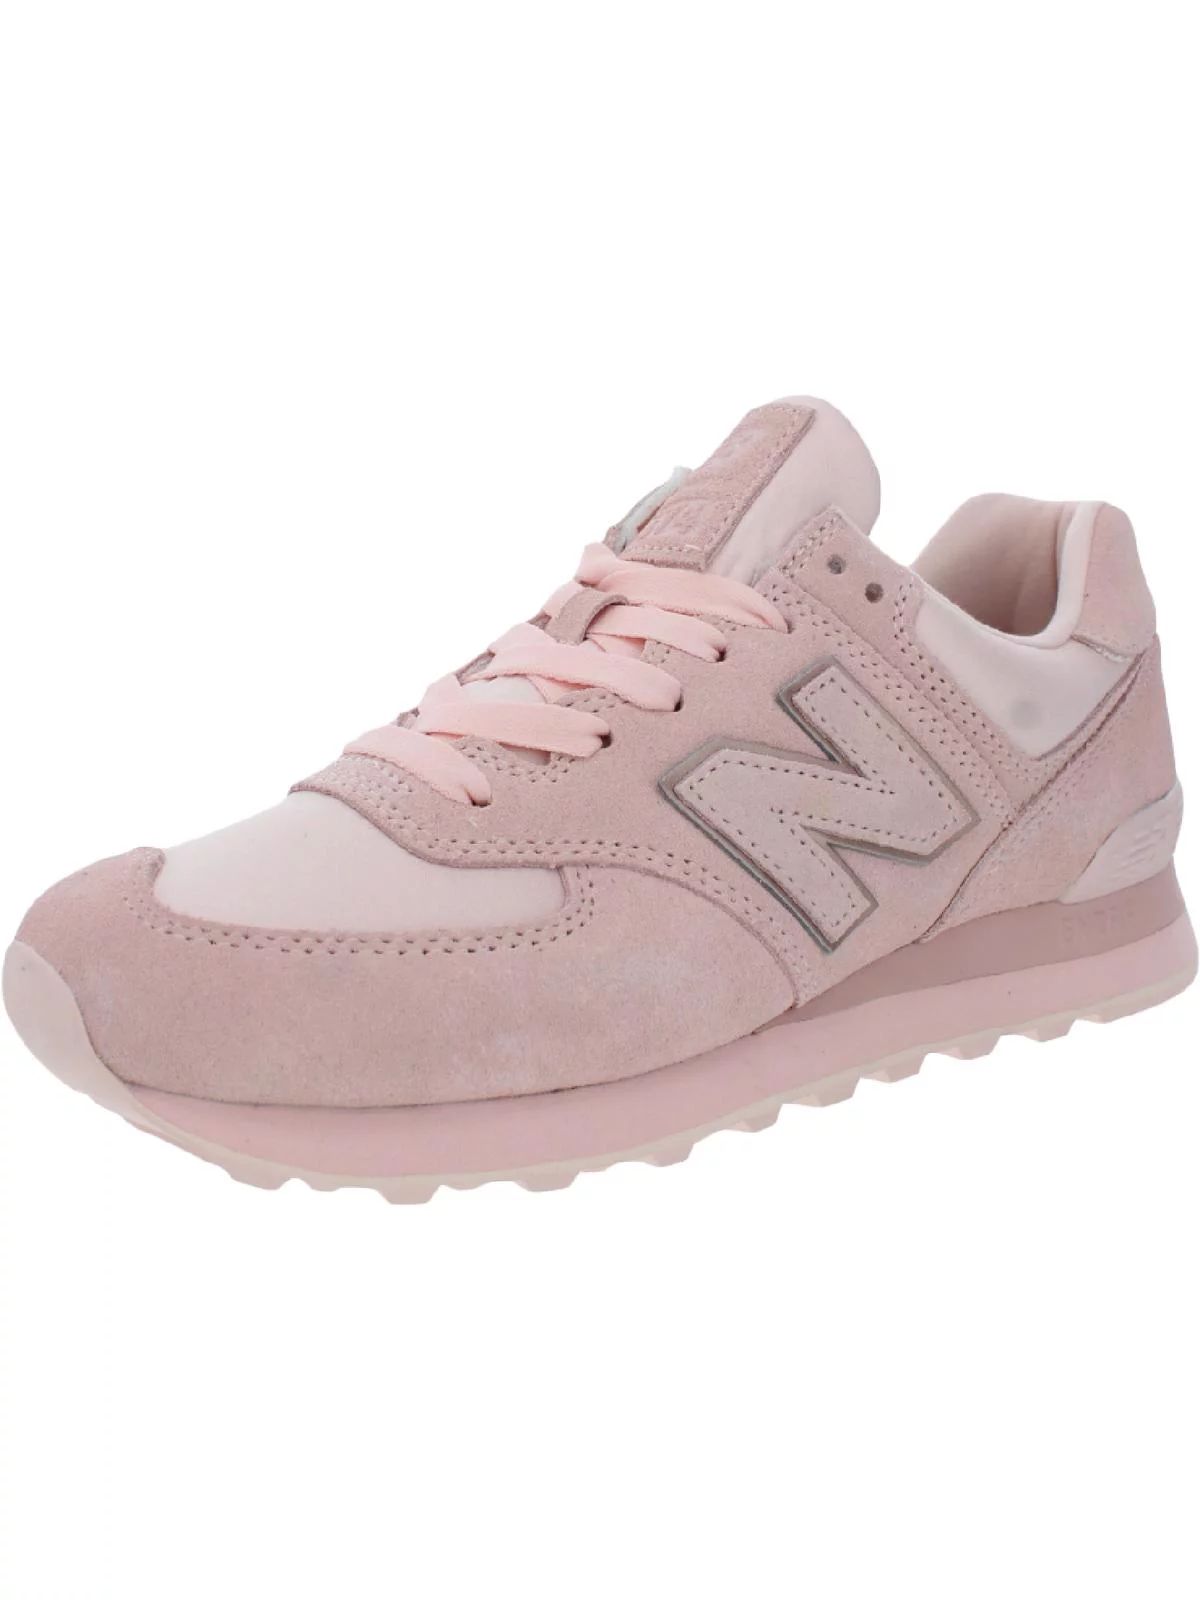 New Balance Womens Suede Lifestyle Casual and Fashion Sneakers | Walmart (US)